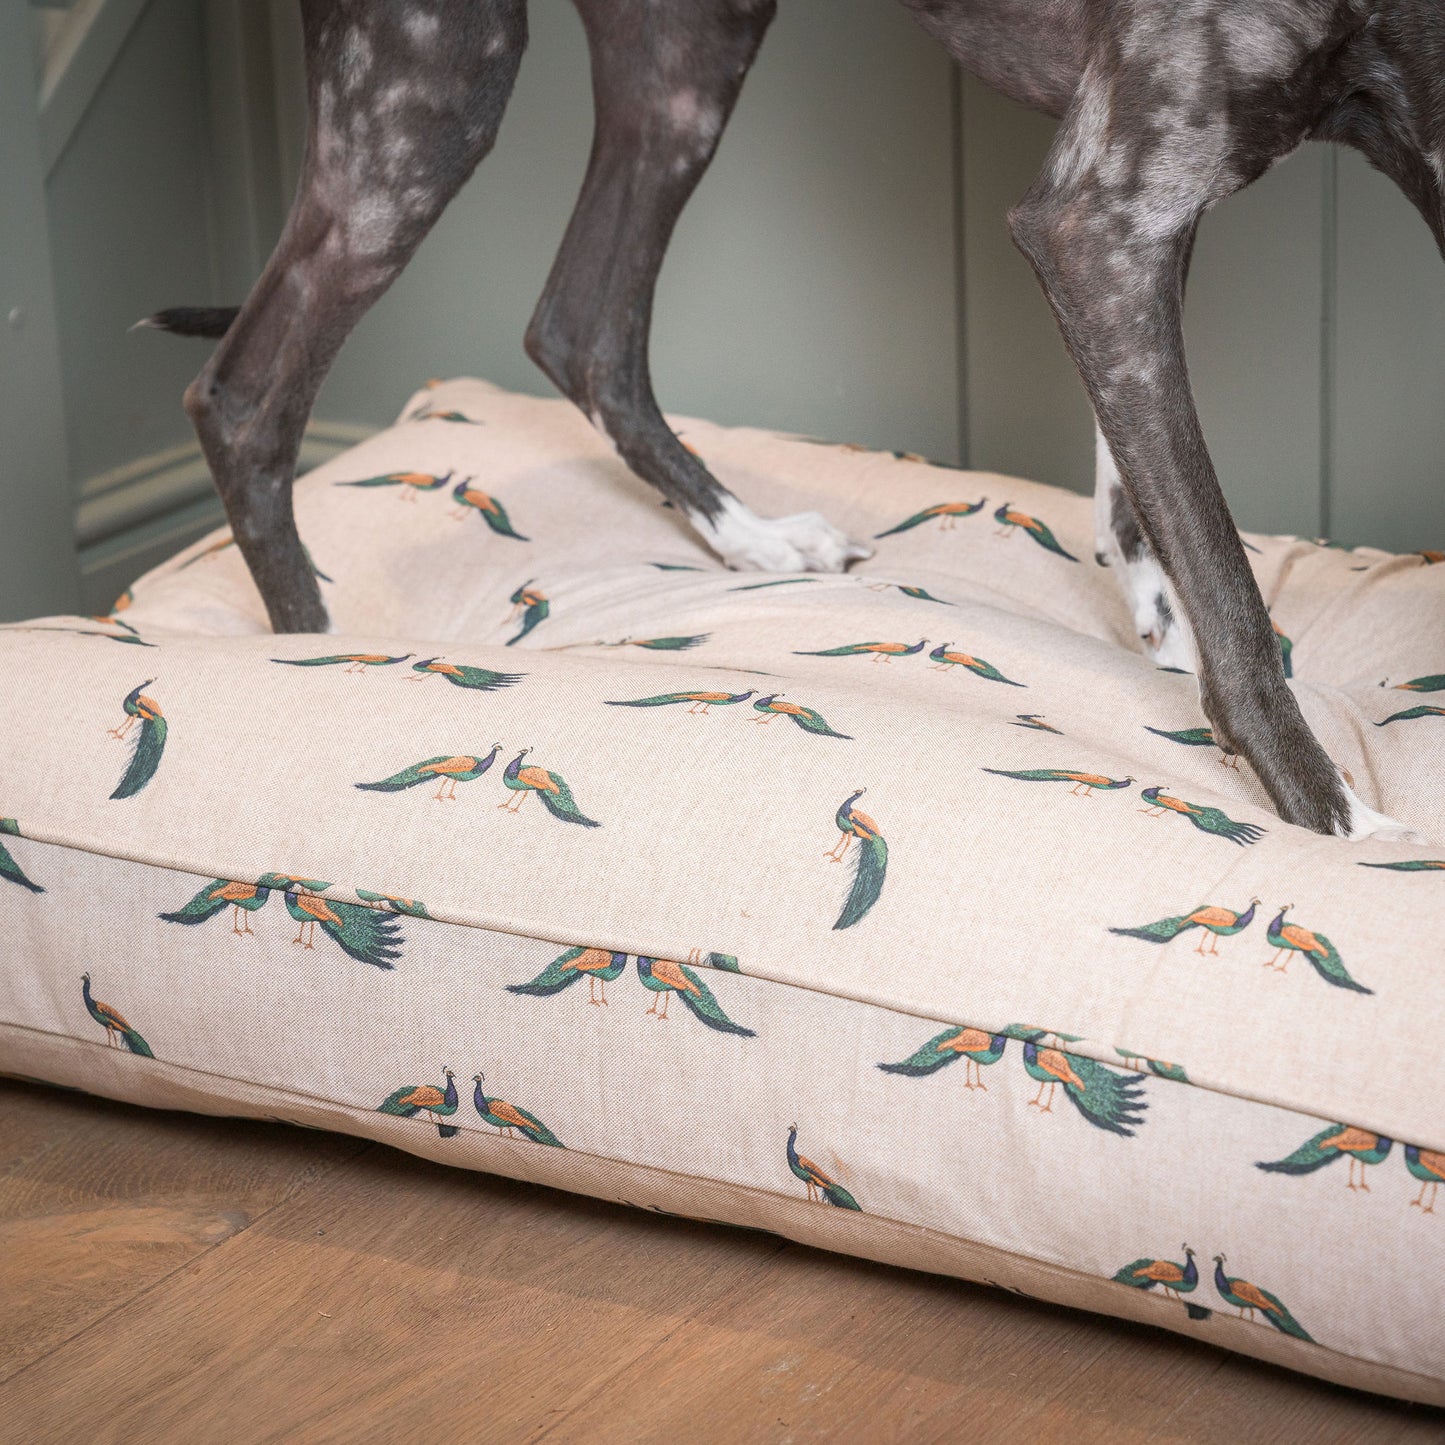 Luxury Dog Cushion, In woodland Peacock. Available For Pet Personalization, Handmade Here at Lords & Labradors US! Order The Perfect Pet Cushion Today For The Ultimate Burrow!